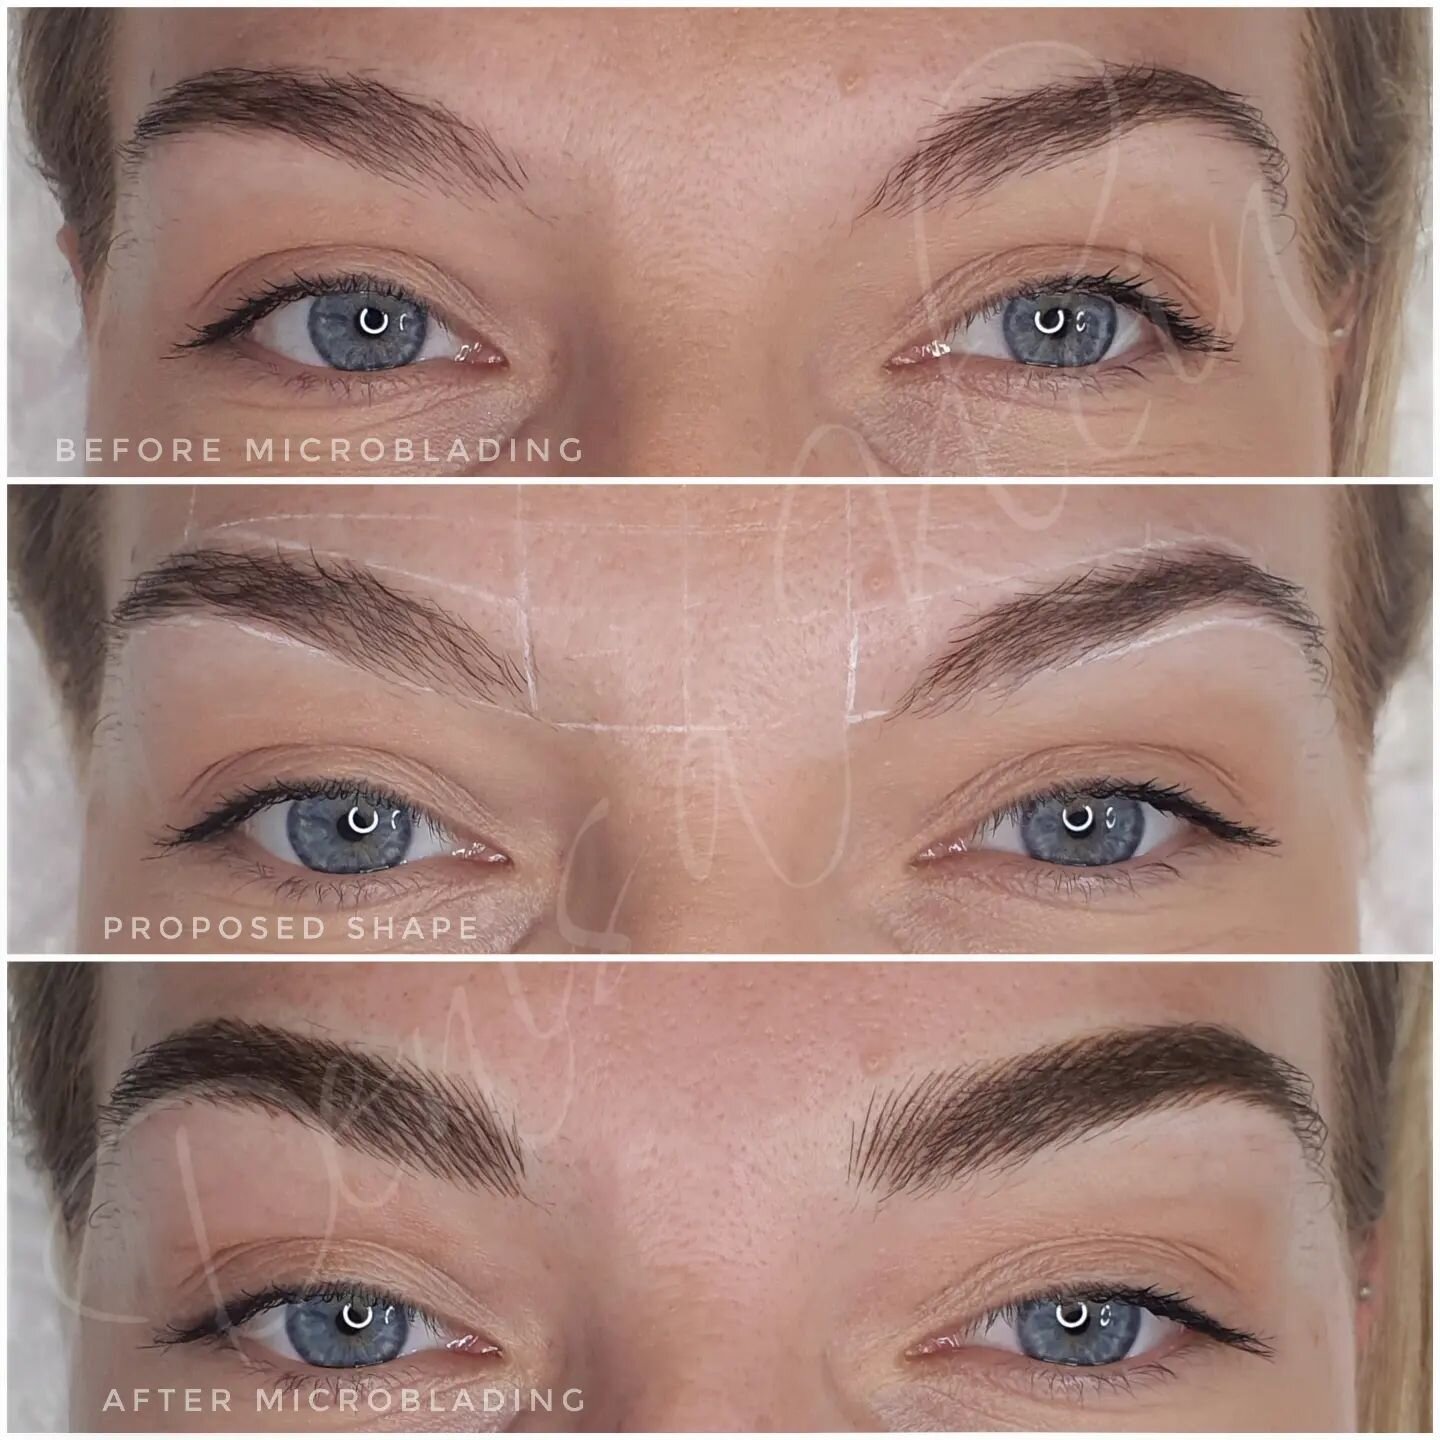 ❗PHIBROWS MICROBLADING❗- eyebrow transformation 😊

If you spend time filling in sparse or thin brows or if you regret over plucking in the past, then microblading may be a great choice. 
This method is perfect for those who want fully reconstruct, d